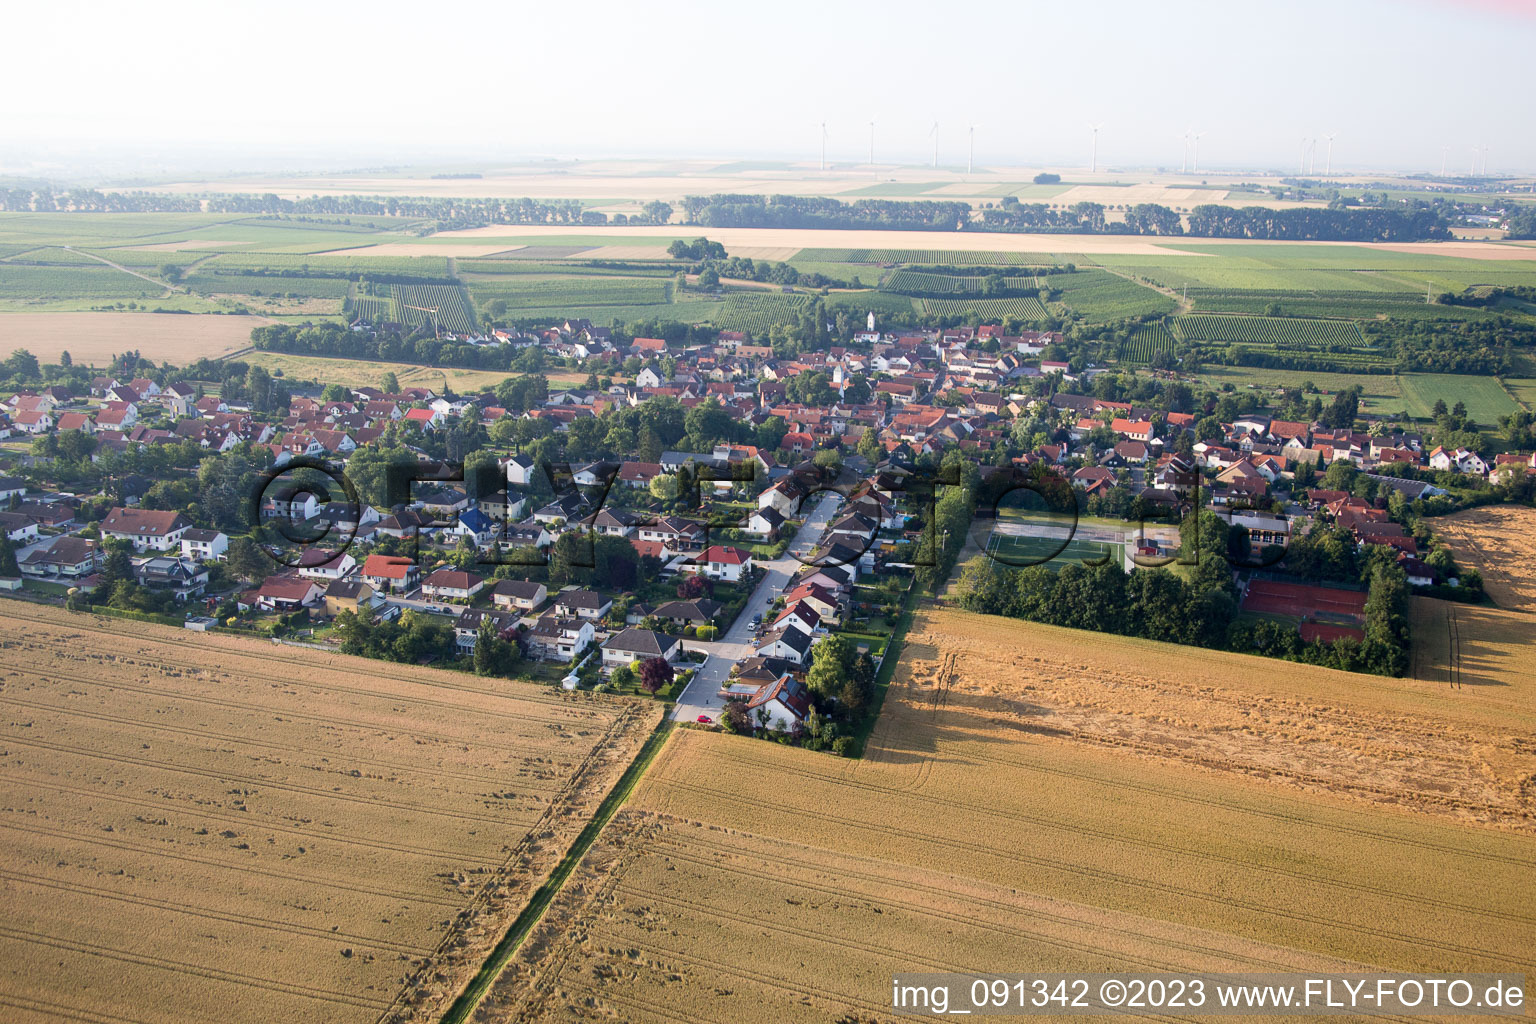 Dalheim in the state Rhineland-Palatinate, Germany from above